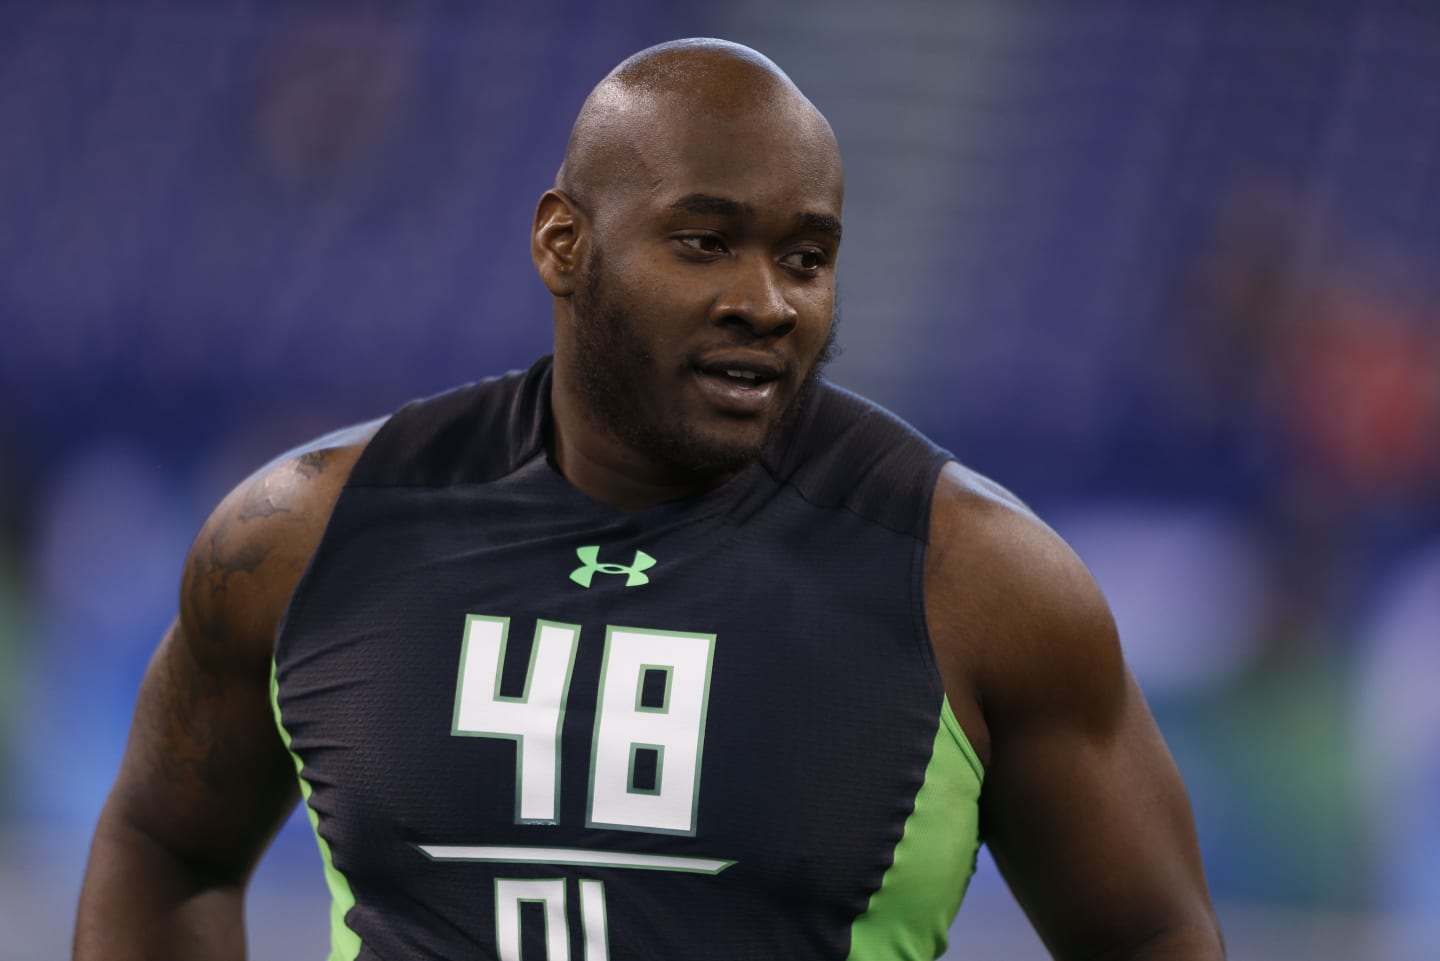 Laremy Tunsil's embarrassing video turned into an NFT. #nfldraft